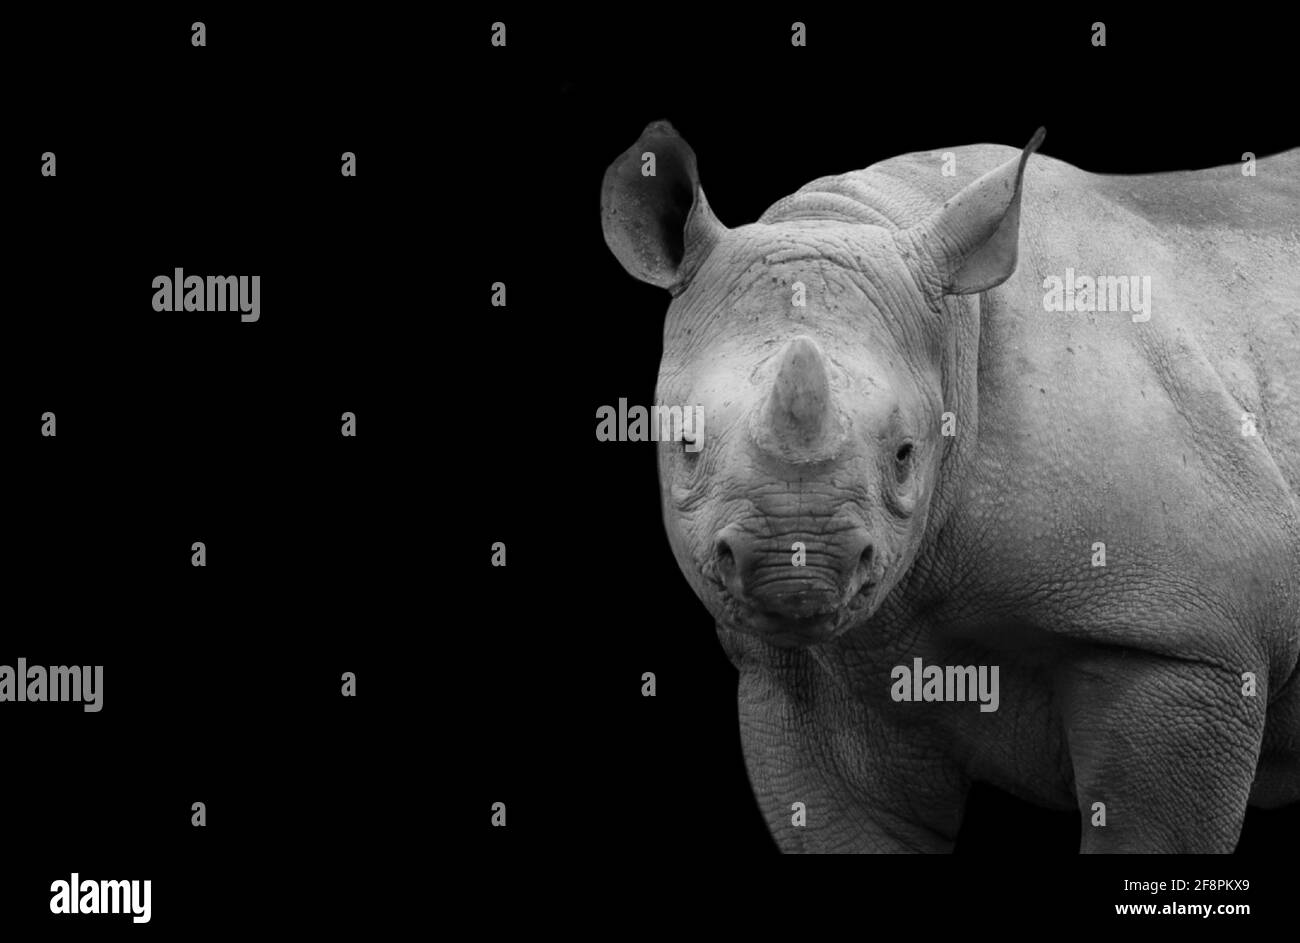 Cute Smiling Rhino Standing In The Black Background Stock Photo